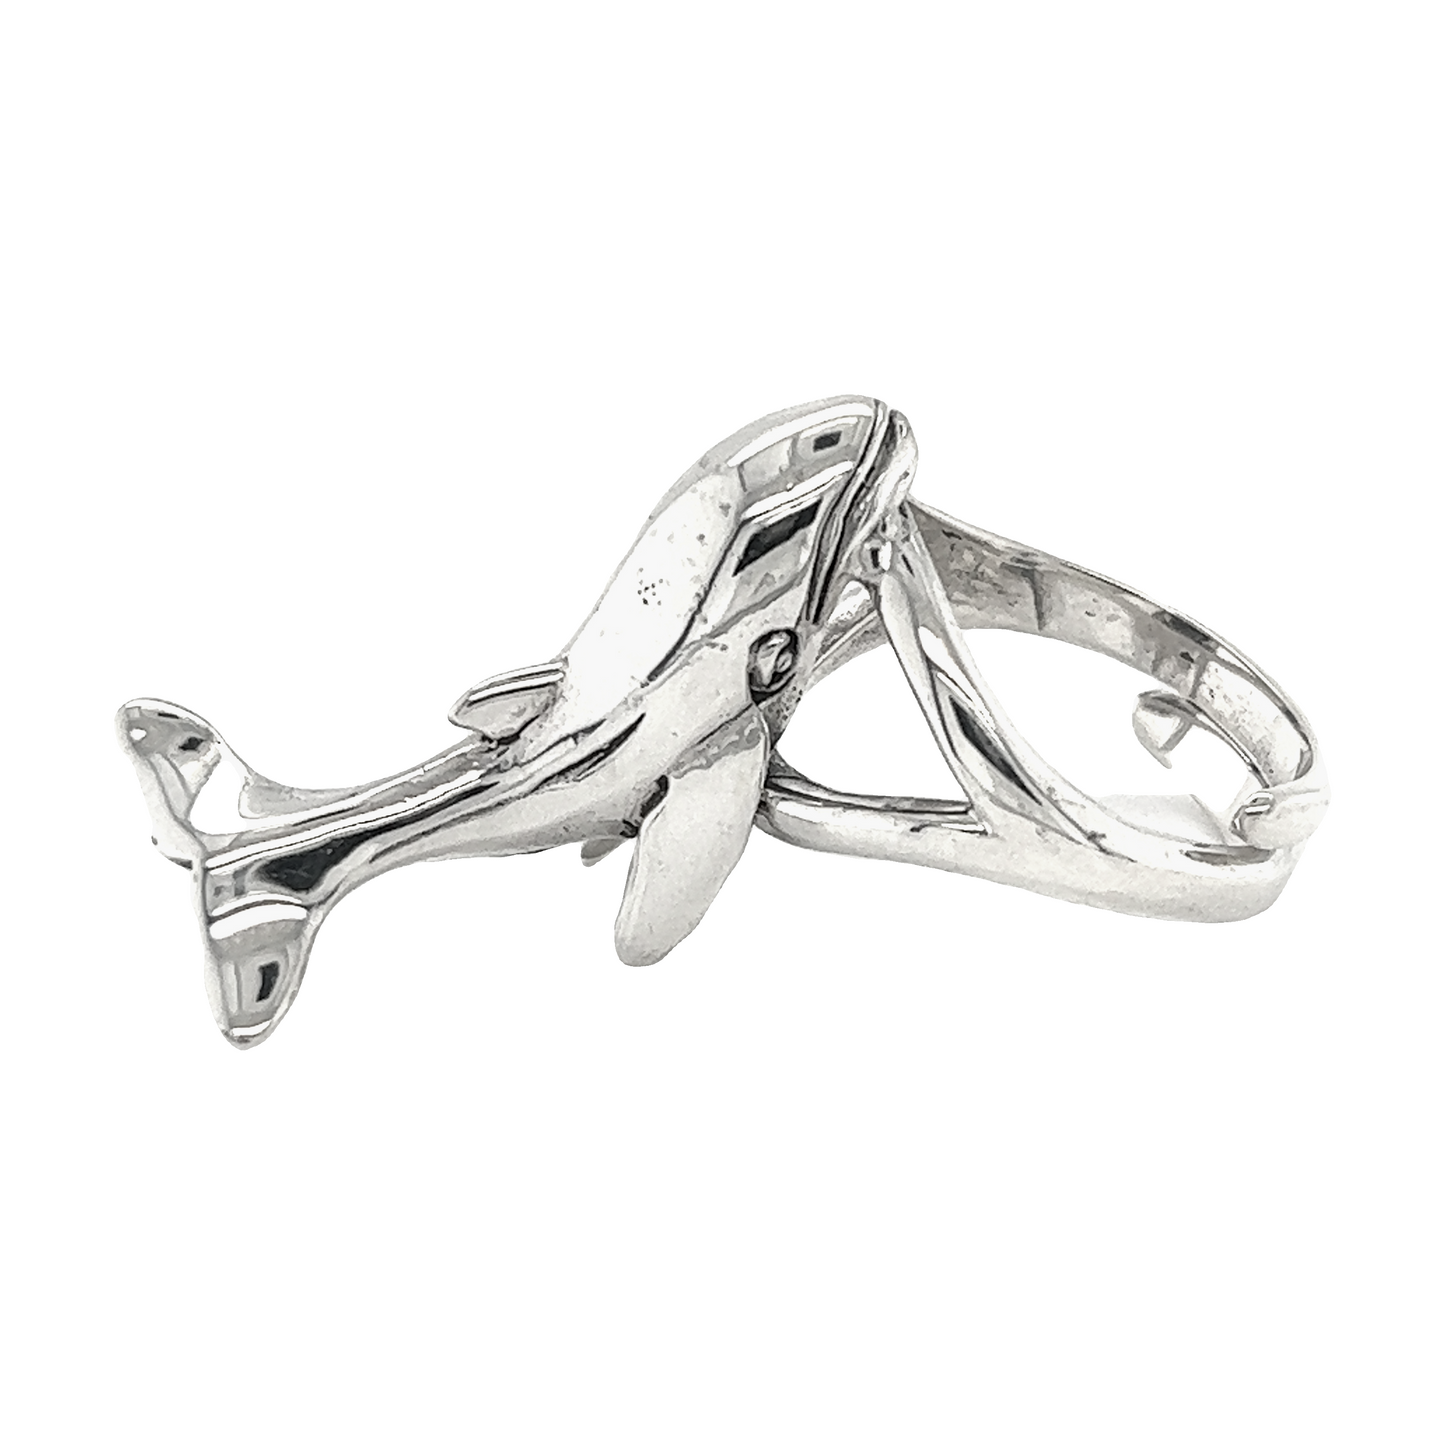 An Exceptional Whale Ring showcasing the beauty of the marine ecosystem.